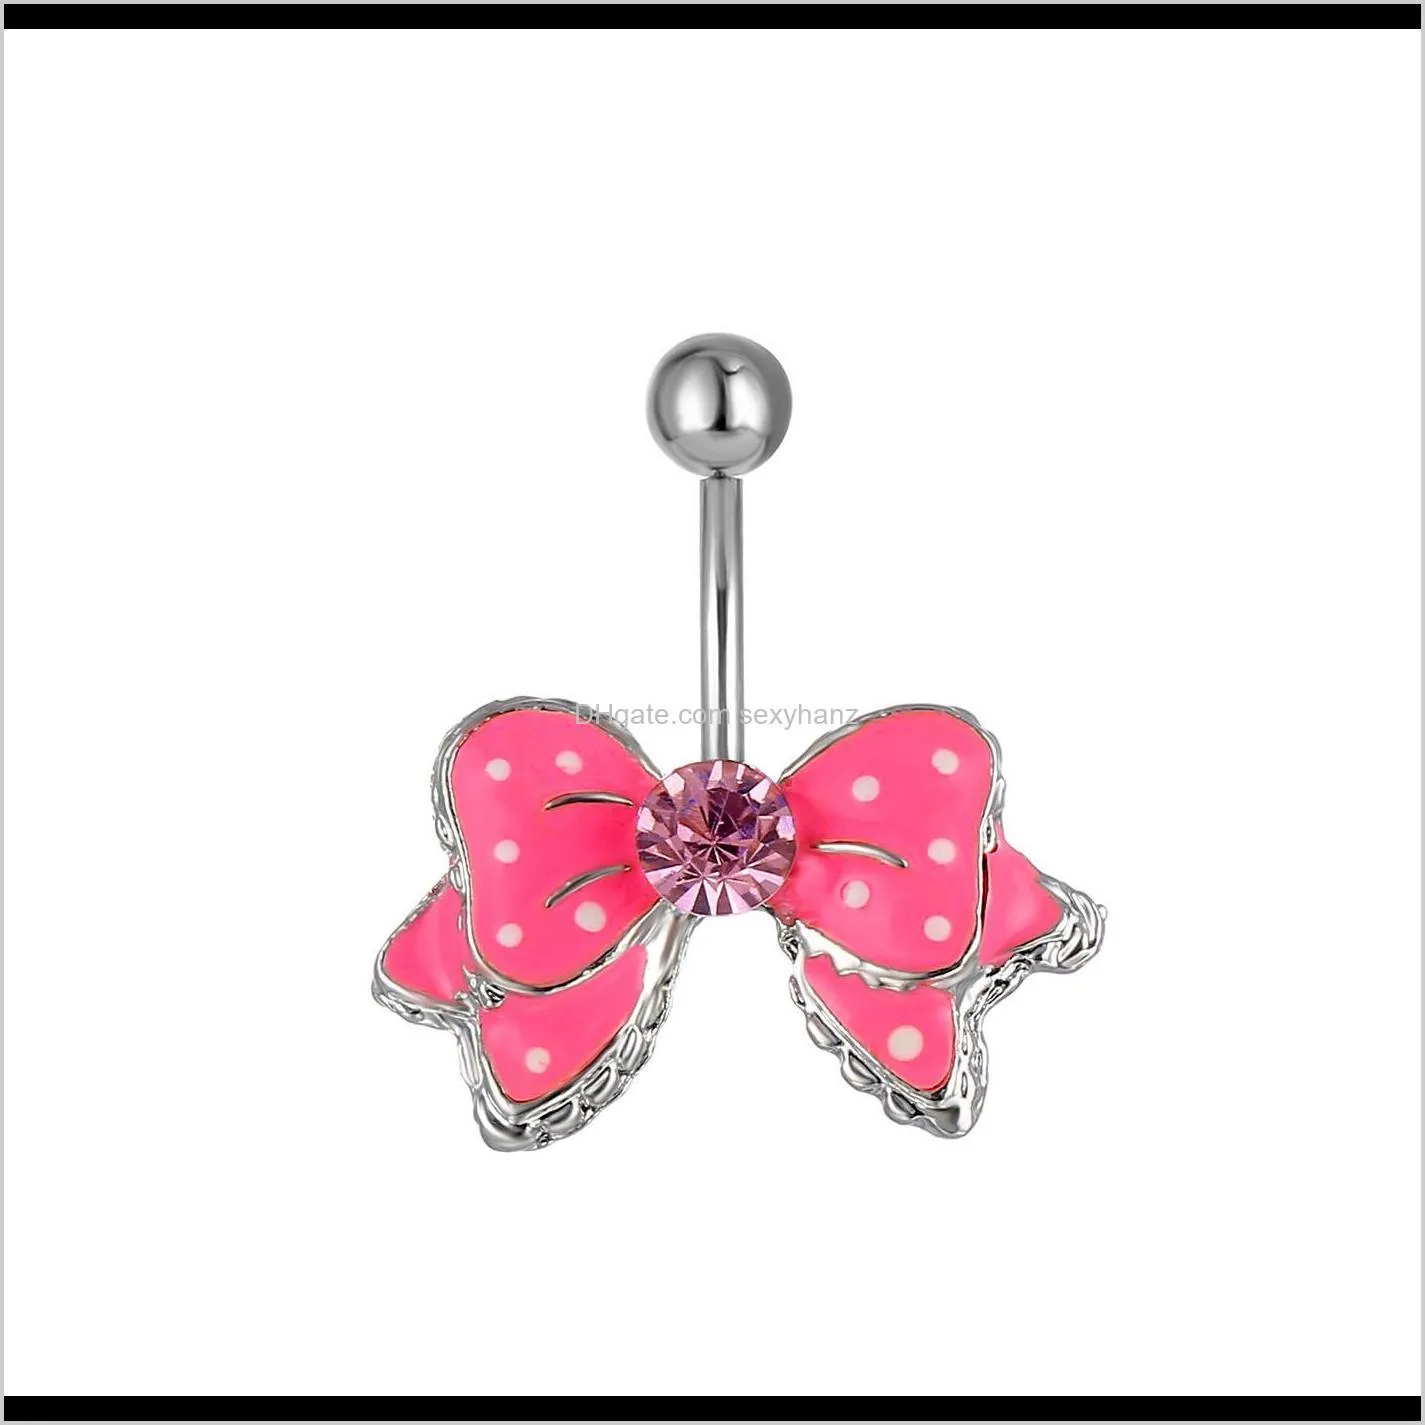 d0029 ( 1 color) the nice style 008-01 belly button navel rings mix colors piercing jewelry body jewelry navel ring